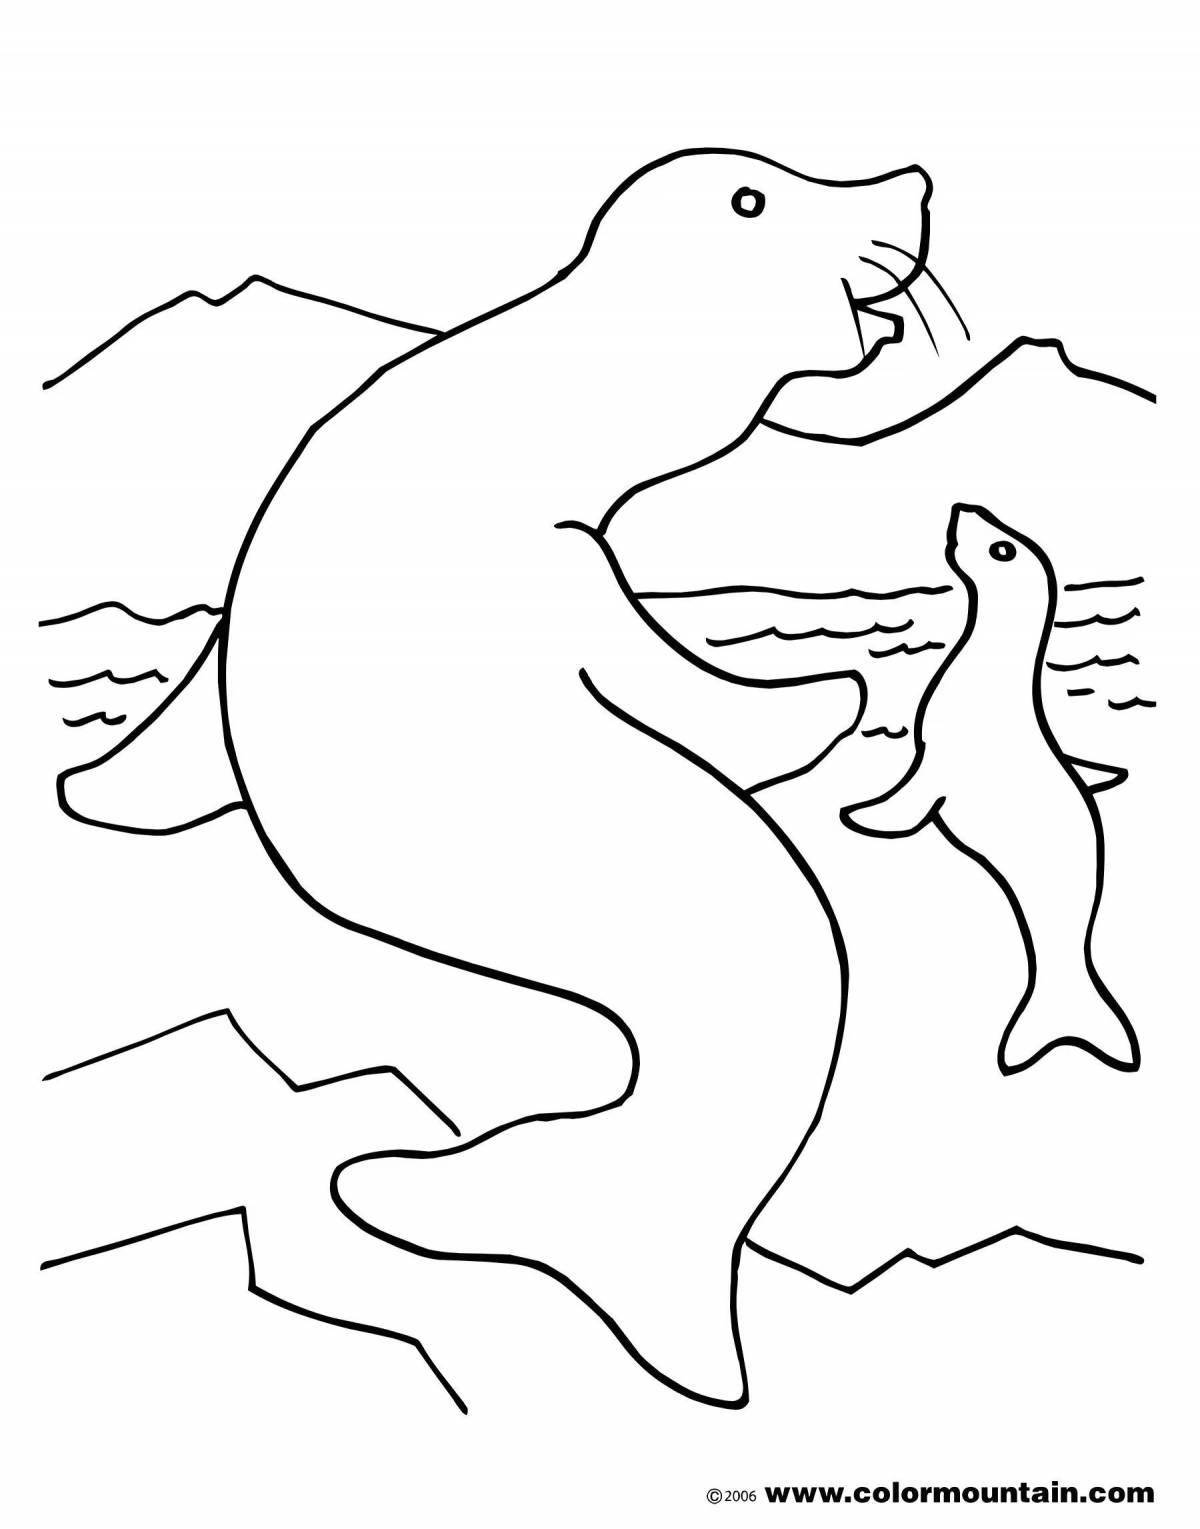 Coloring page funny sea leopard